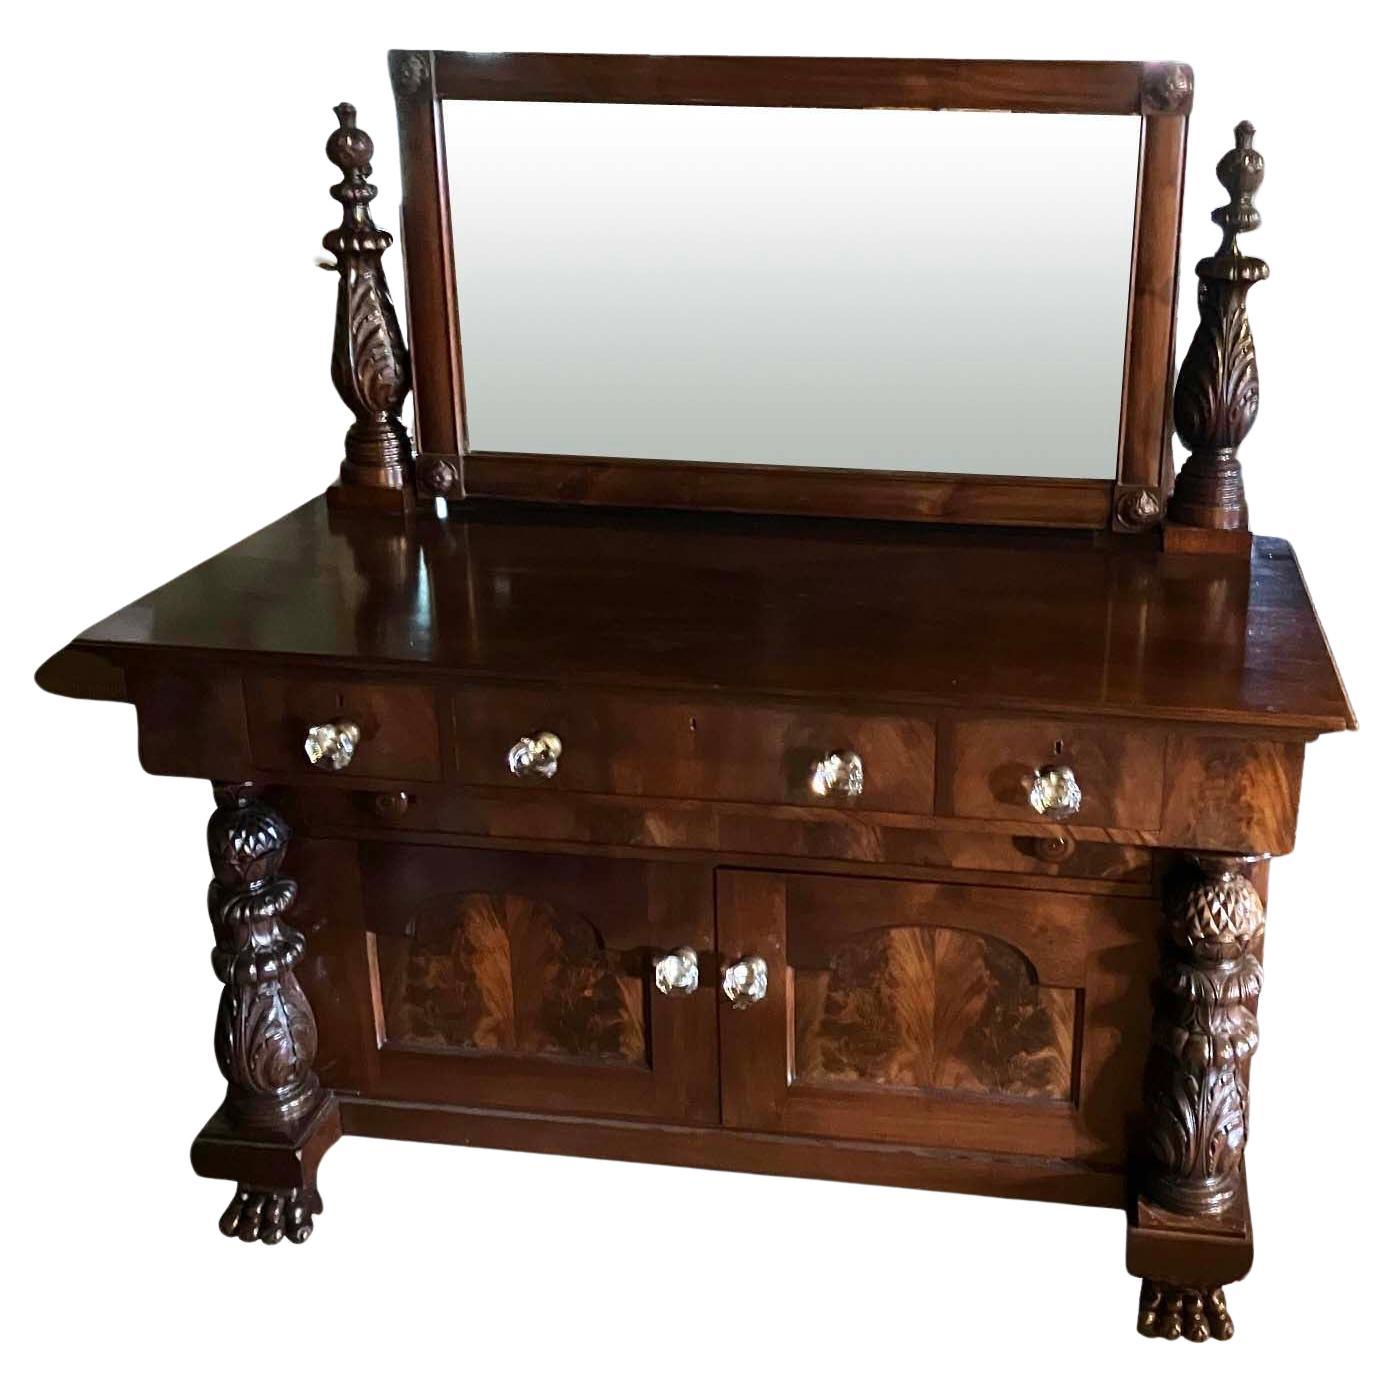 Large American Empire Revival Mahogany Dressing Chest with Adjustable Mirror For Sale